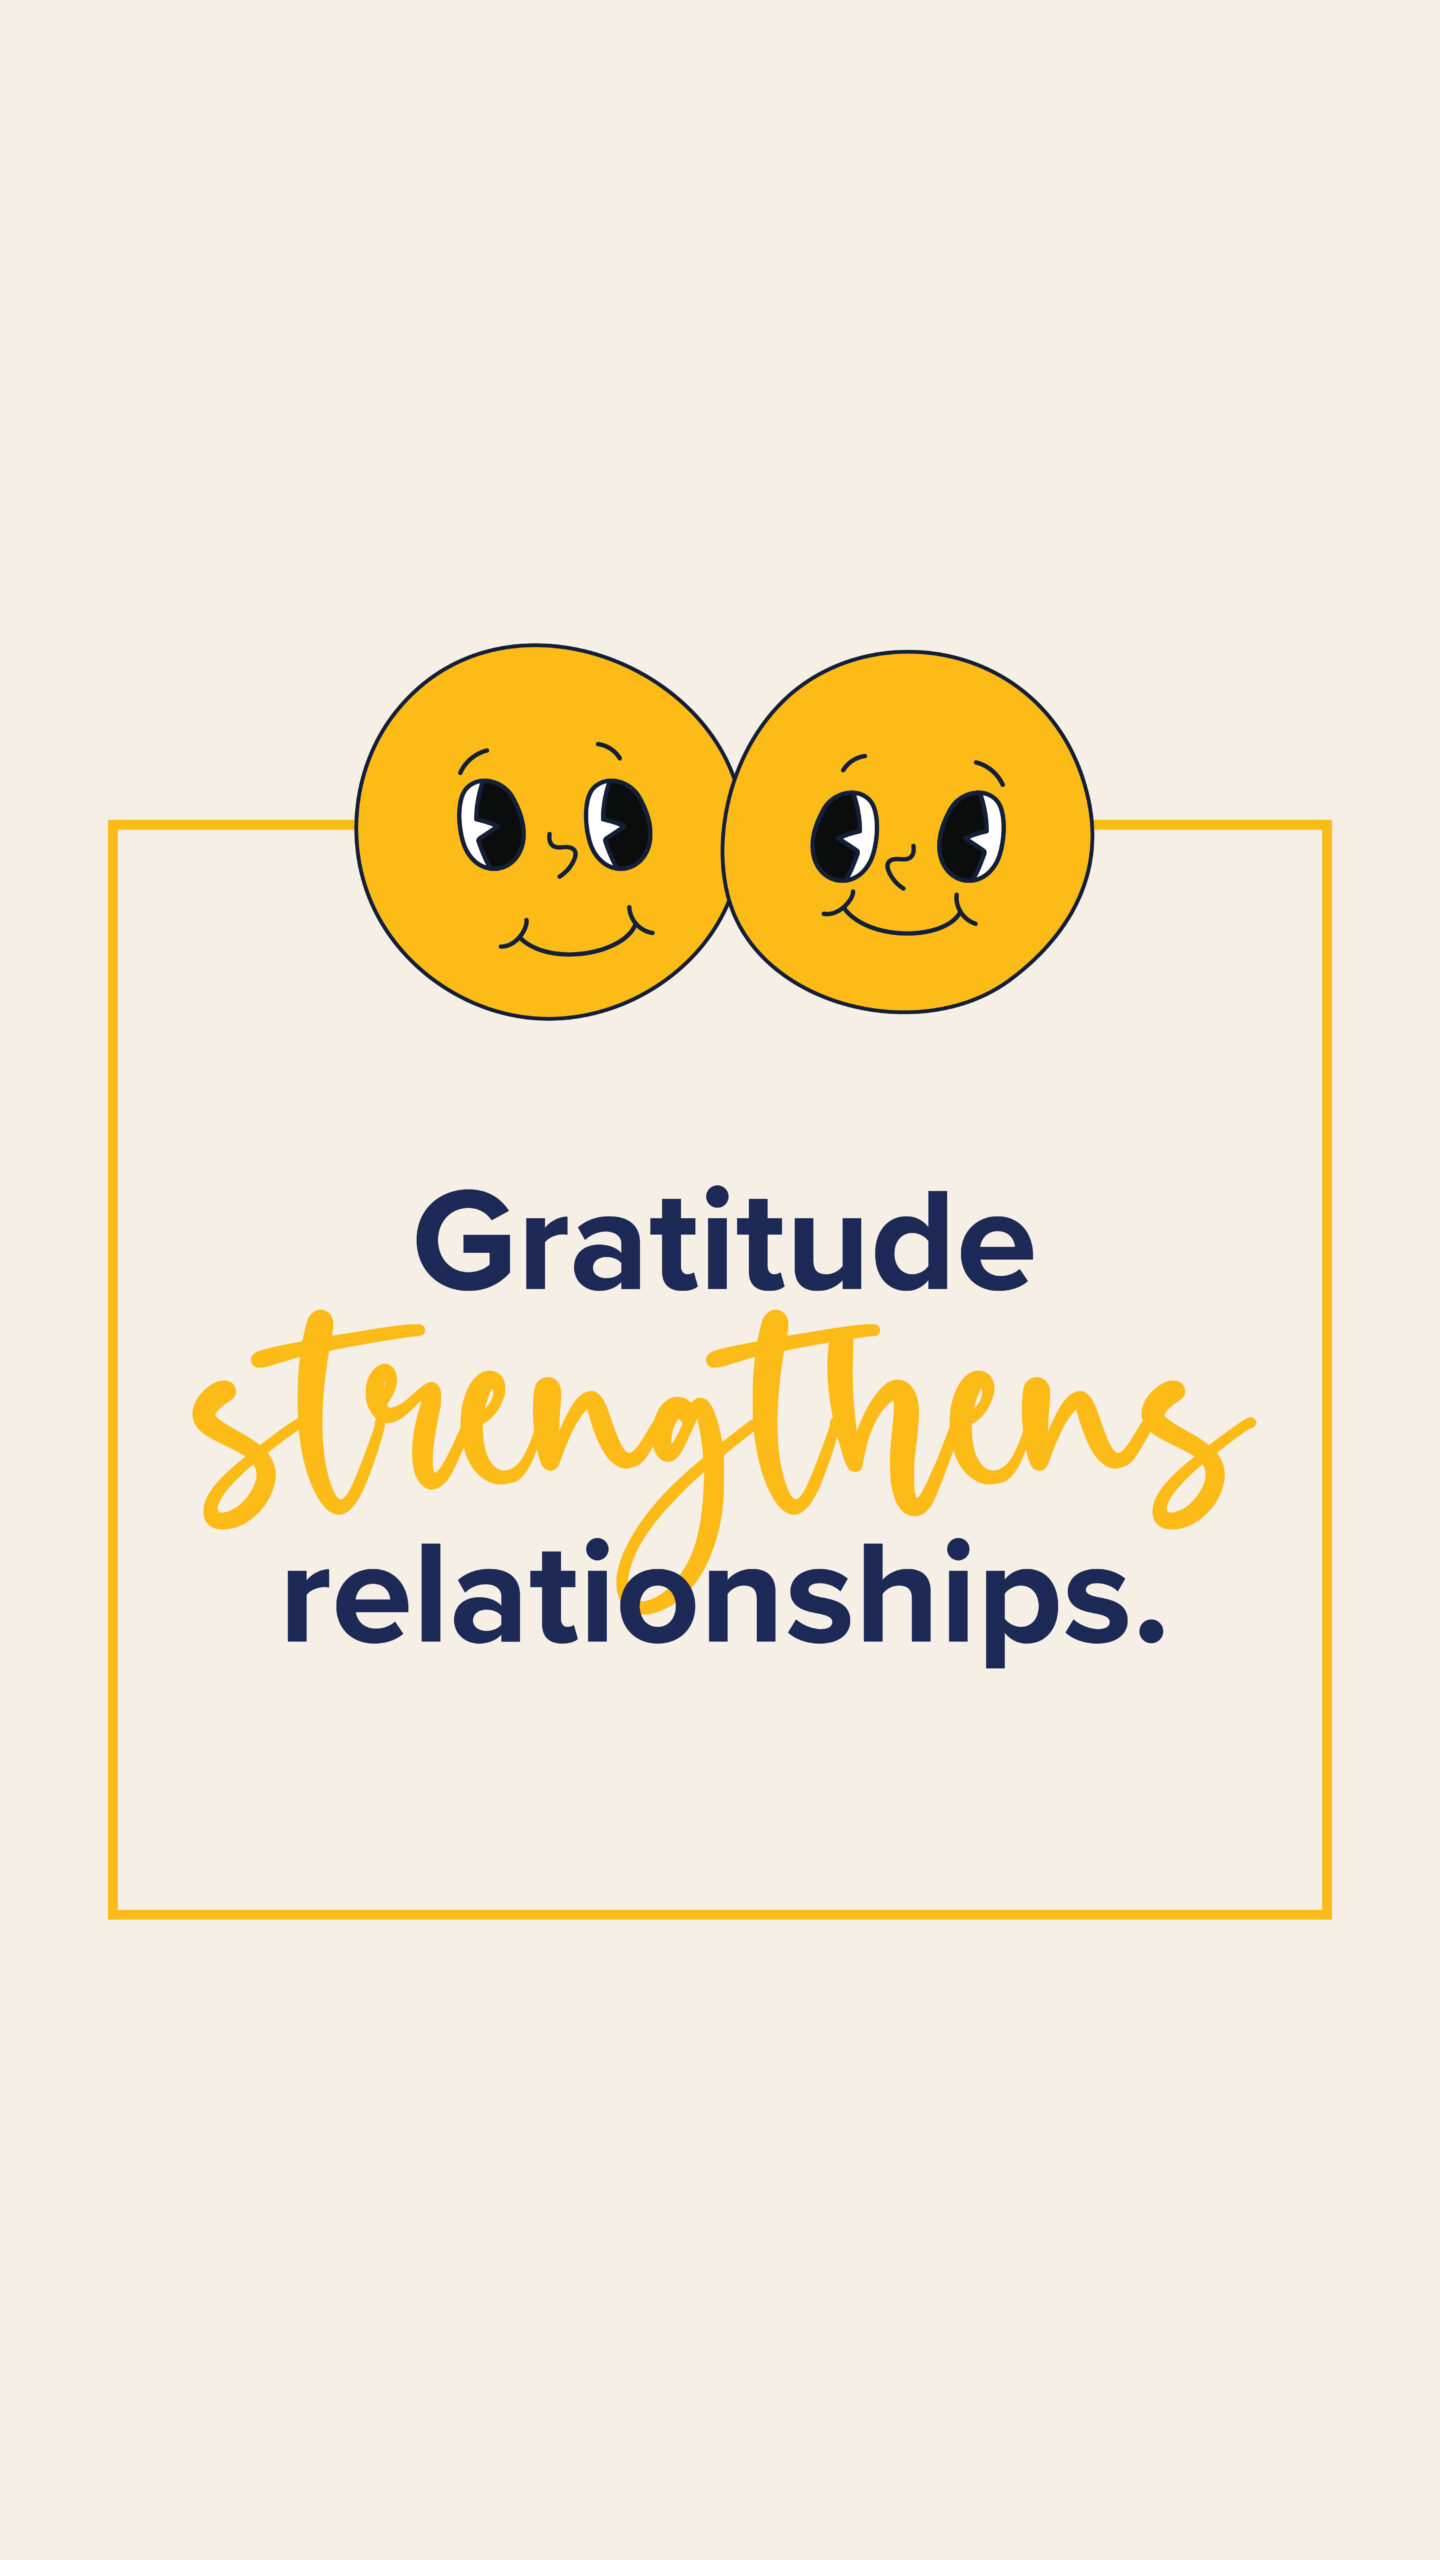 Gratitude strengthens relationships. 2 yellow smiley faces graphics